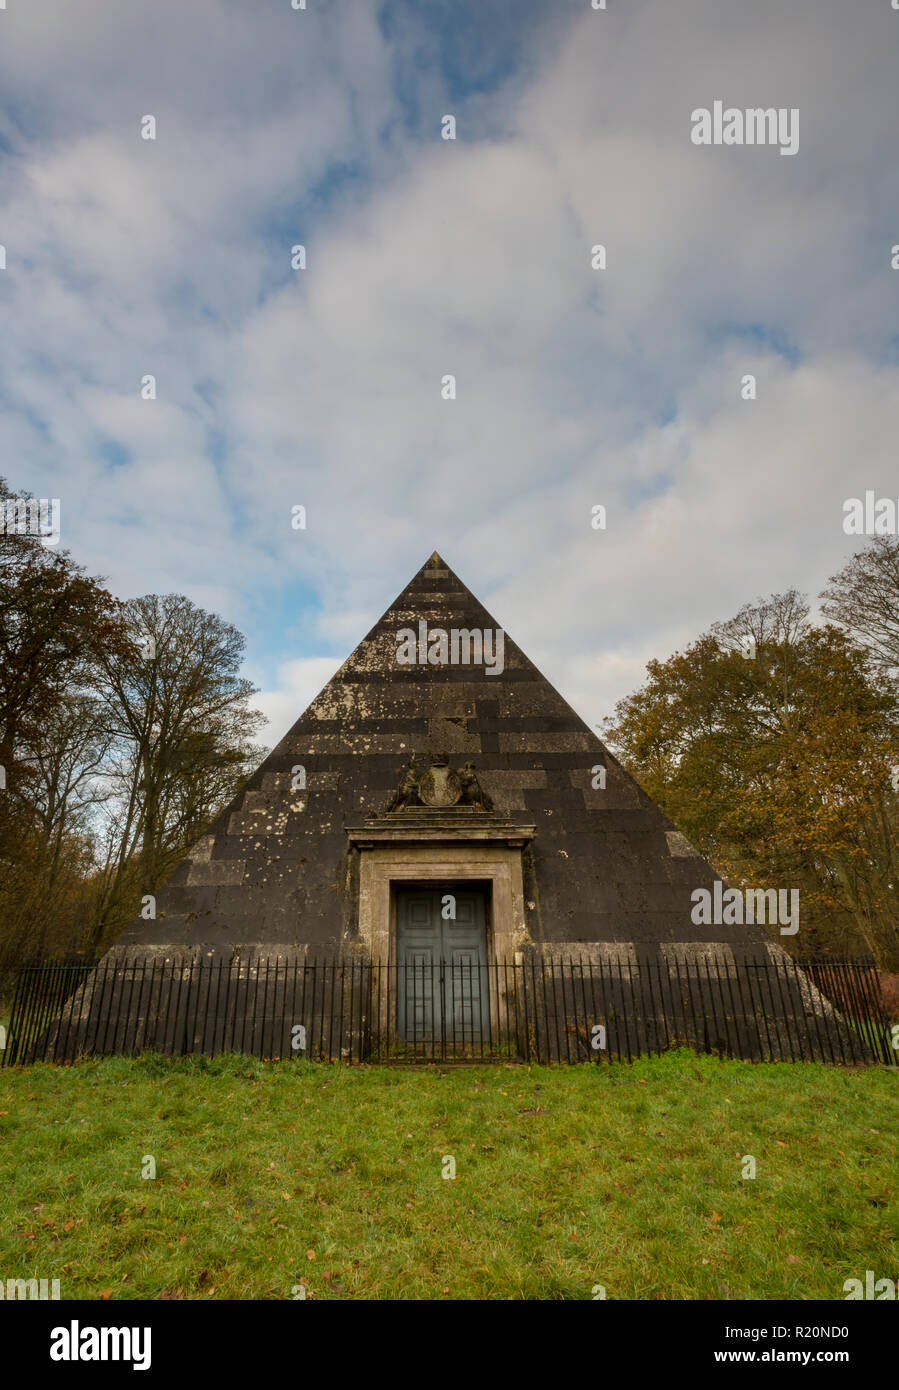 the mausoleum at blickling hall in the great wood at blickling estate for the 2nd earl of buckingham. tomb or mausoleum at blickling, norfolk. Stock Photo